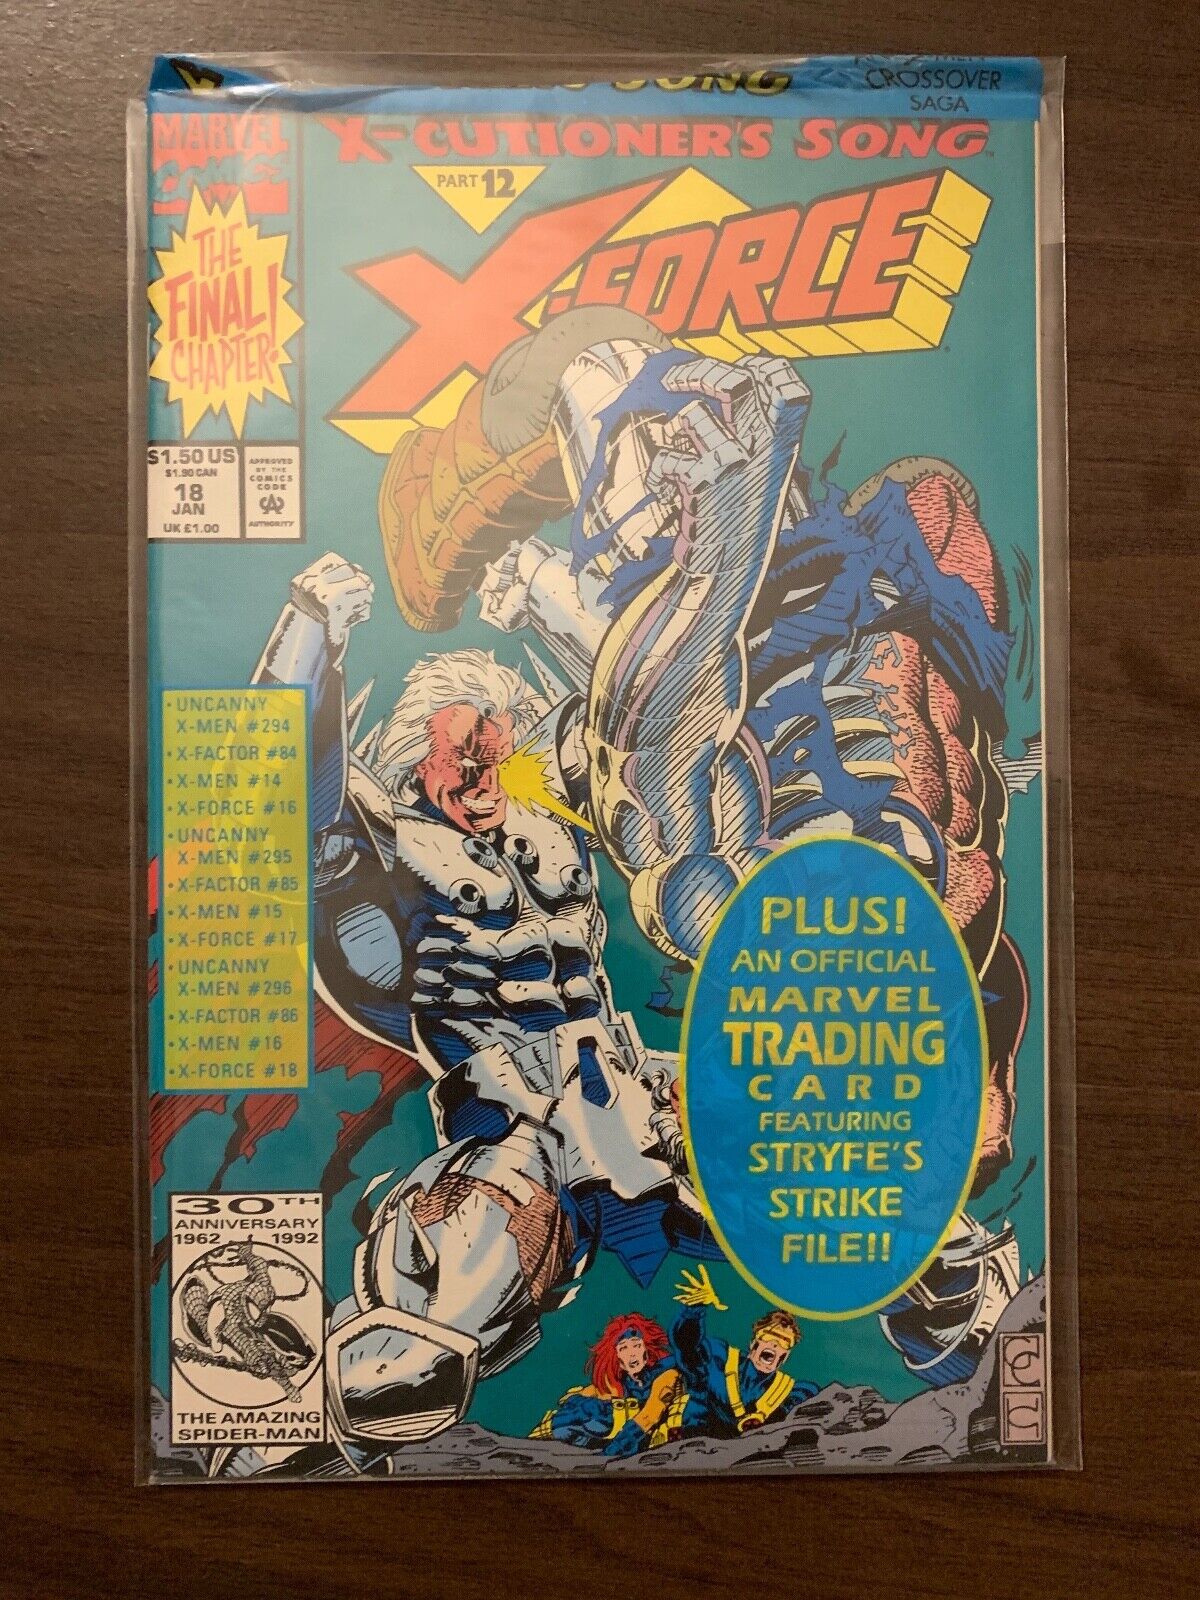 X-Force vol.1 #18 1993 Sealed w/Card High Grade 9.6 Marvel Comic Book CL44-57